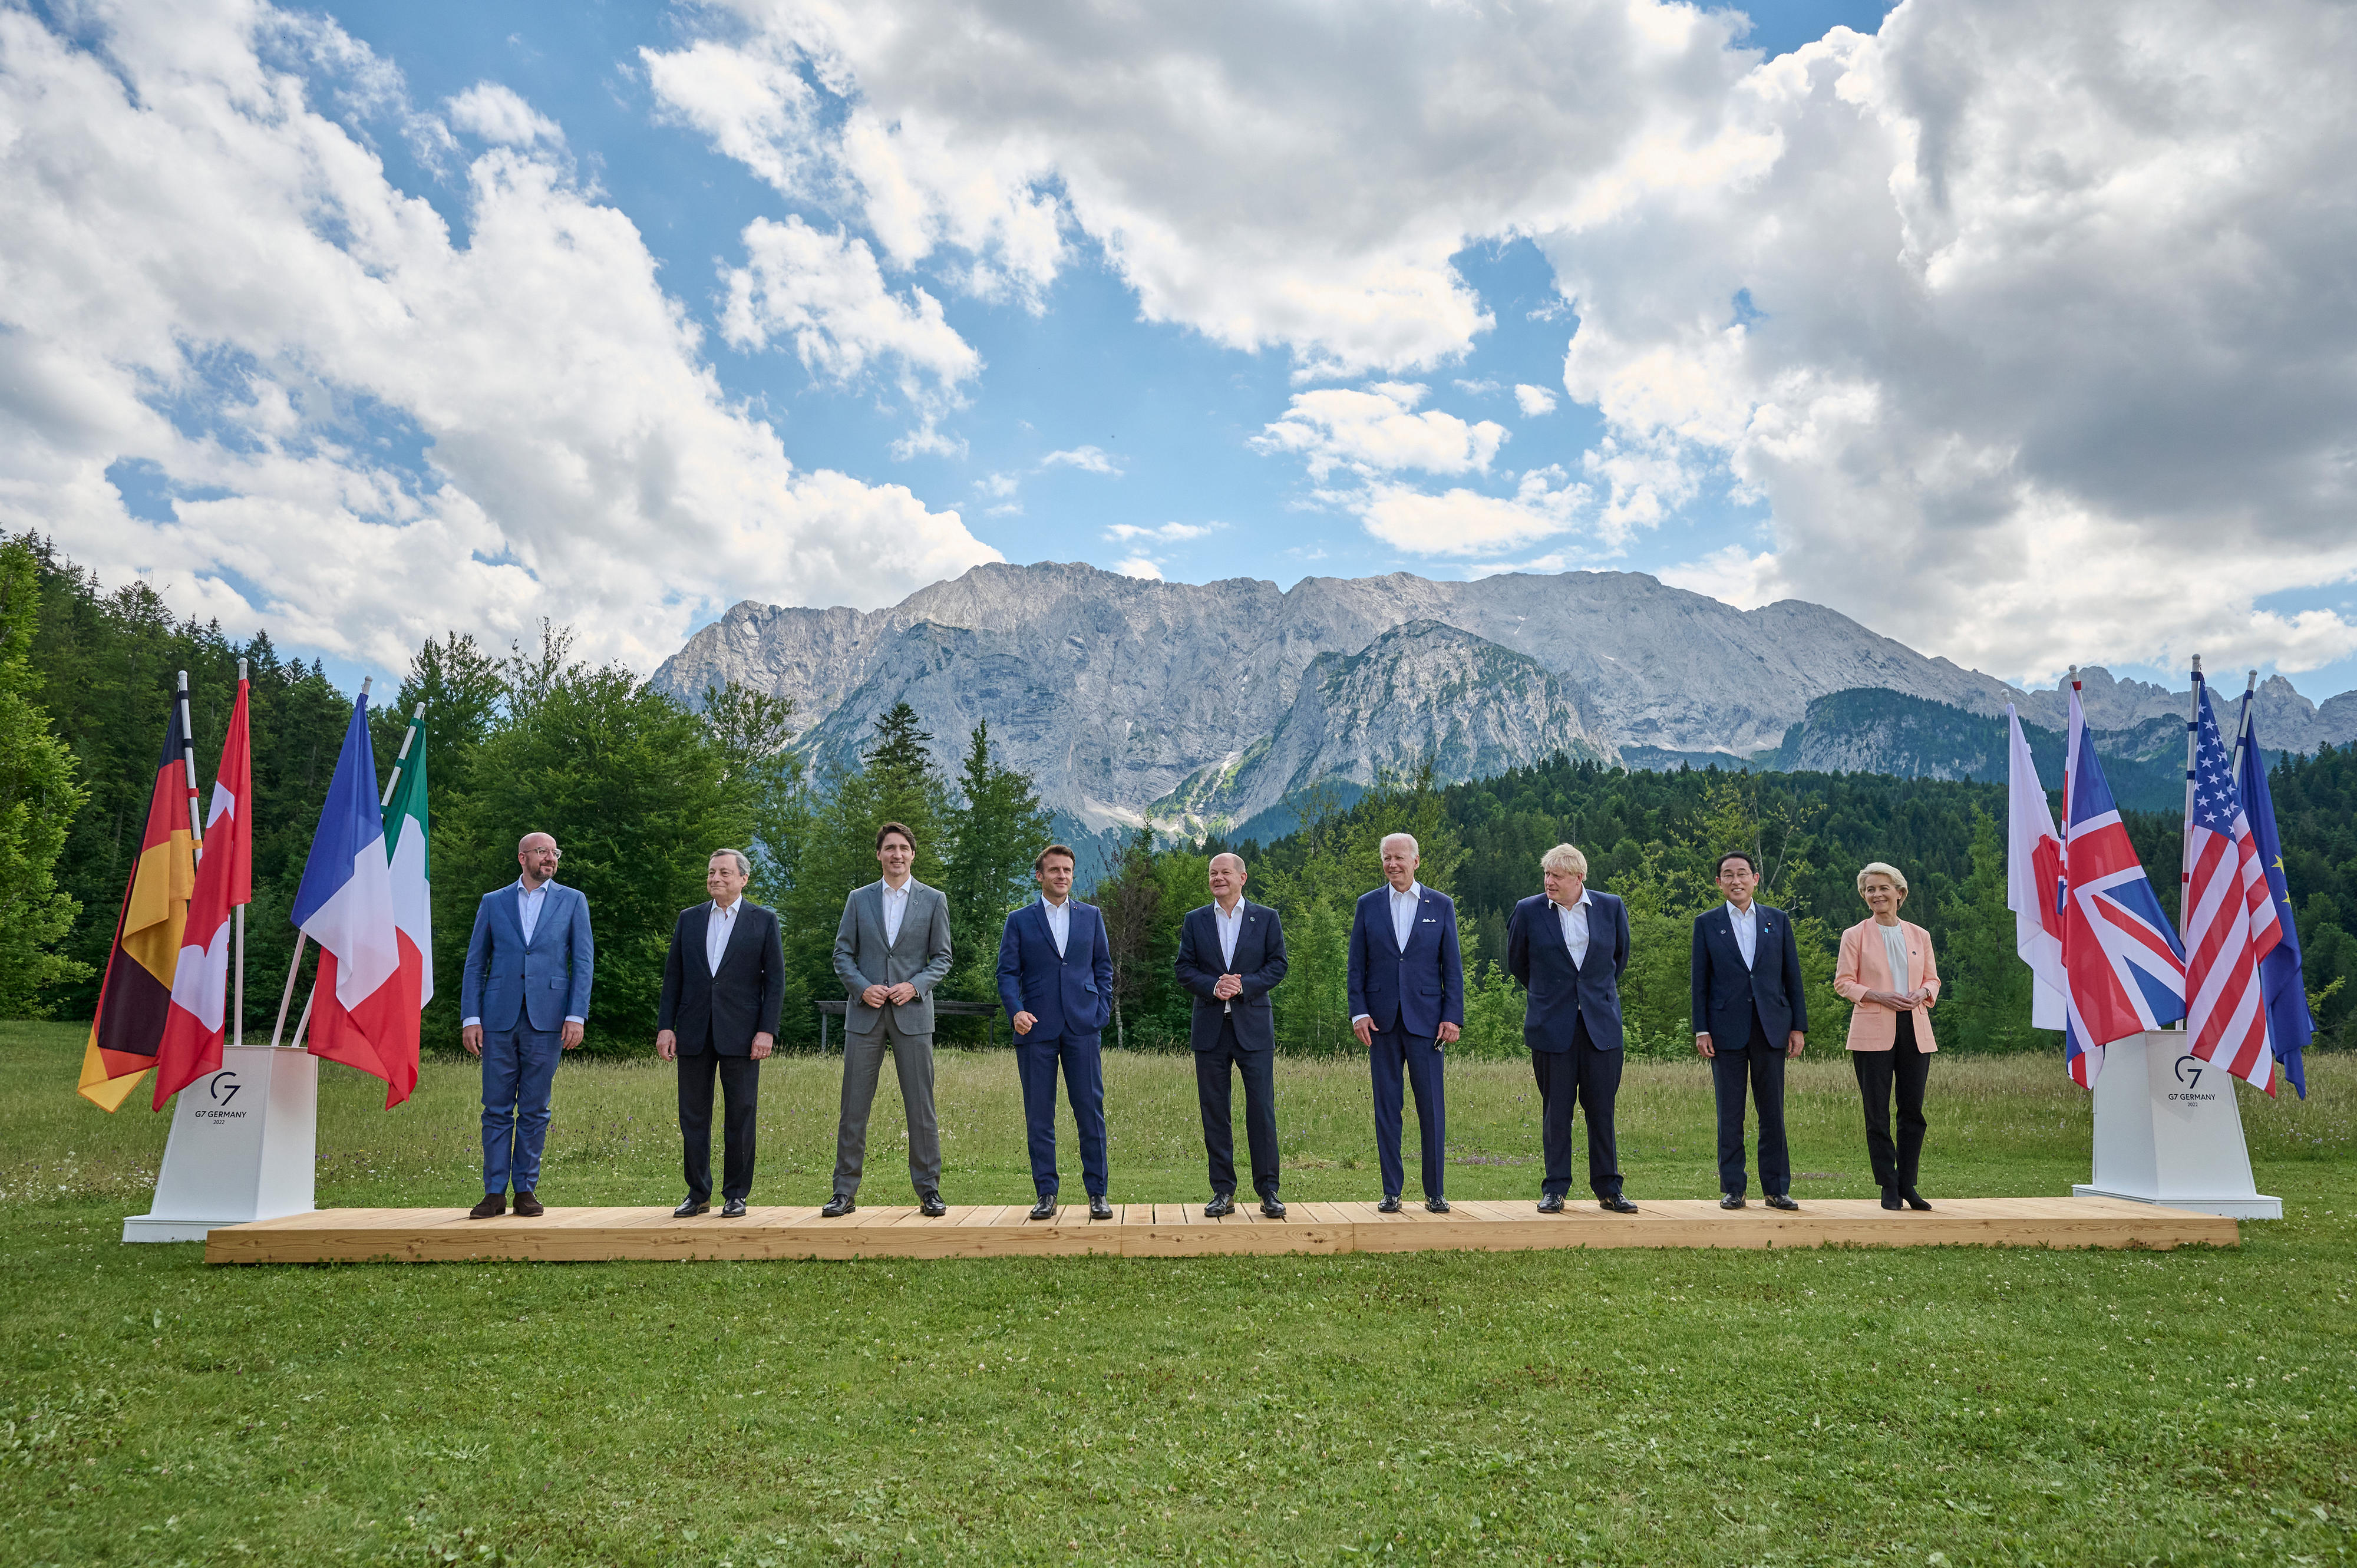 Group photo of the G7: Charles Michel (President of the European Council), Mario Draghi (Prime Minister of Italy), Justin Trudeau (Prime Minister of Canada), Emmanuel Macron (President of France), German Chancellor Olaf Scholz, Joe Biden (President of the USA), Boris Johnson (Prime Minister of Great Britain), Fumio Kishida (Prime Minister of Japan) and Ursula von der Leyen (President of the EU Commission).